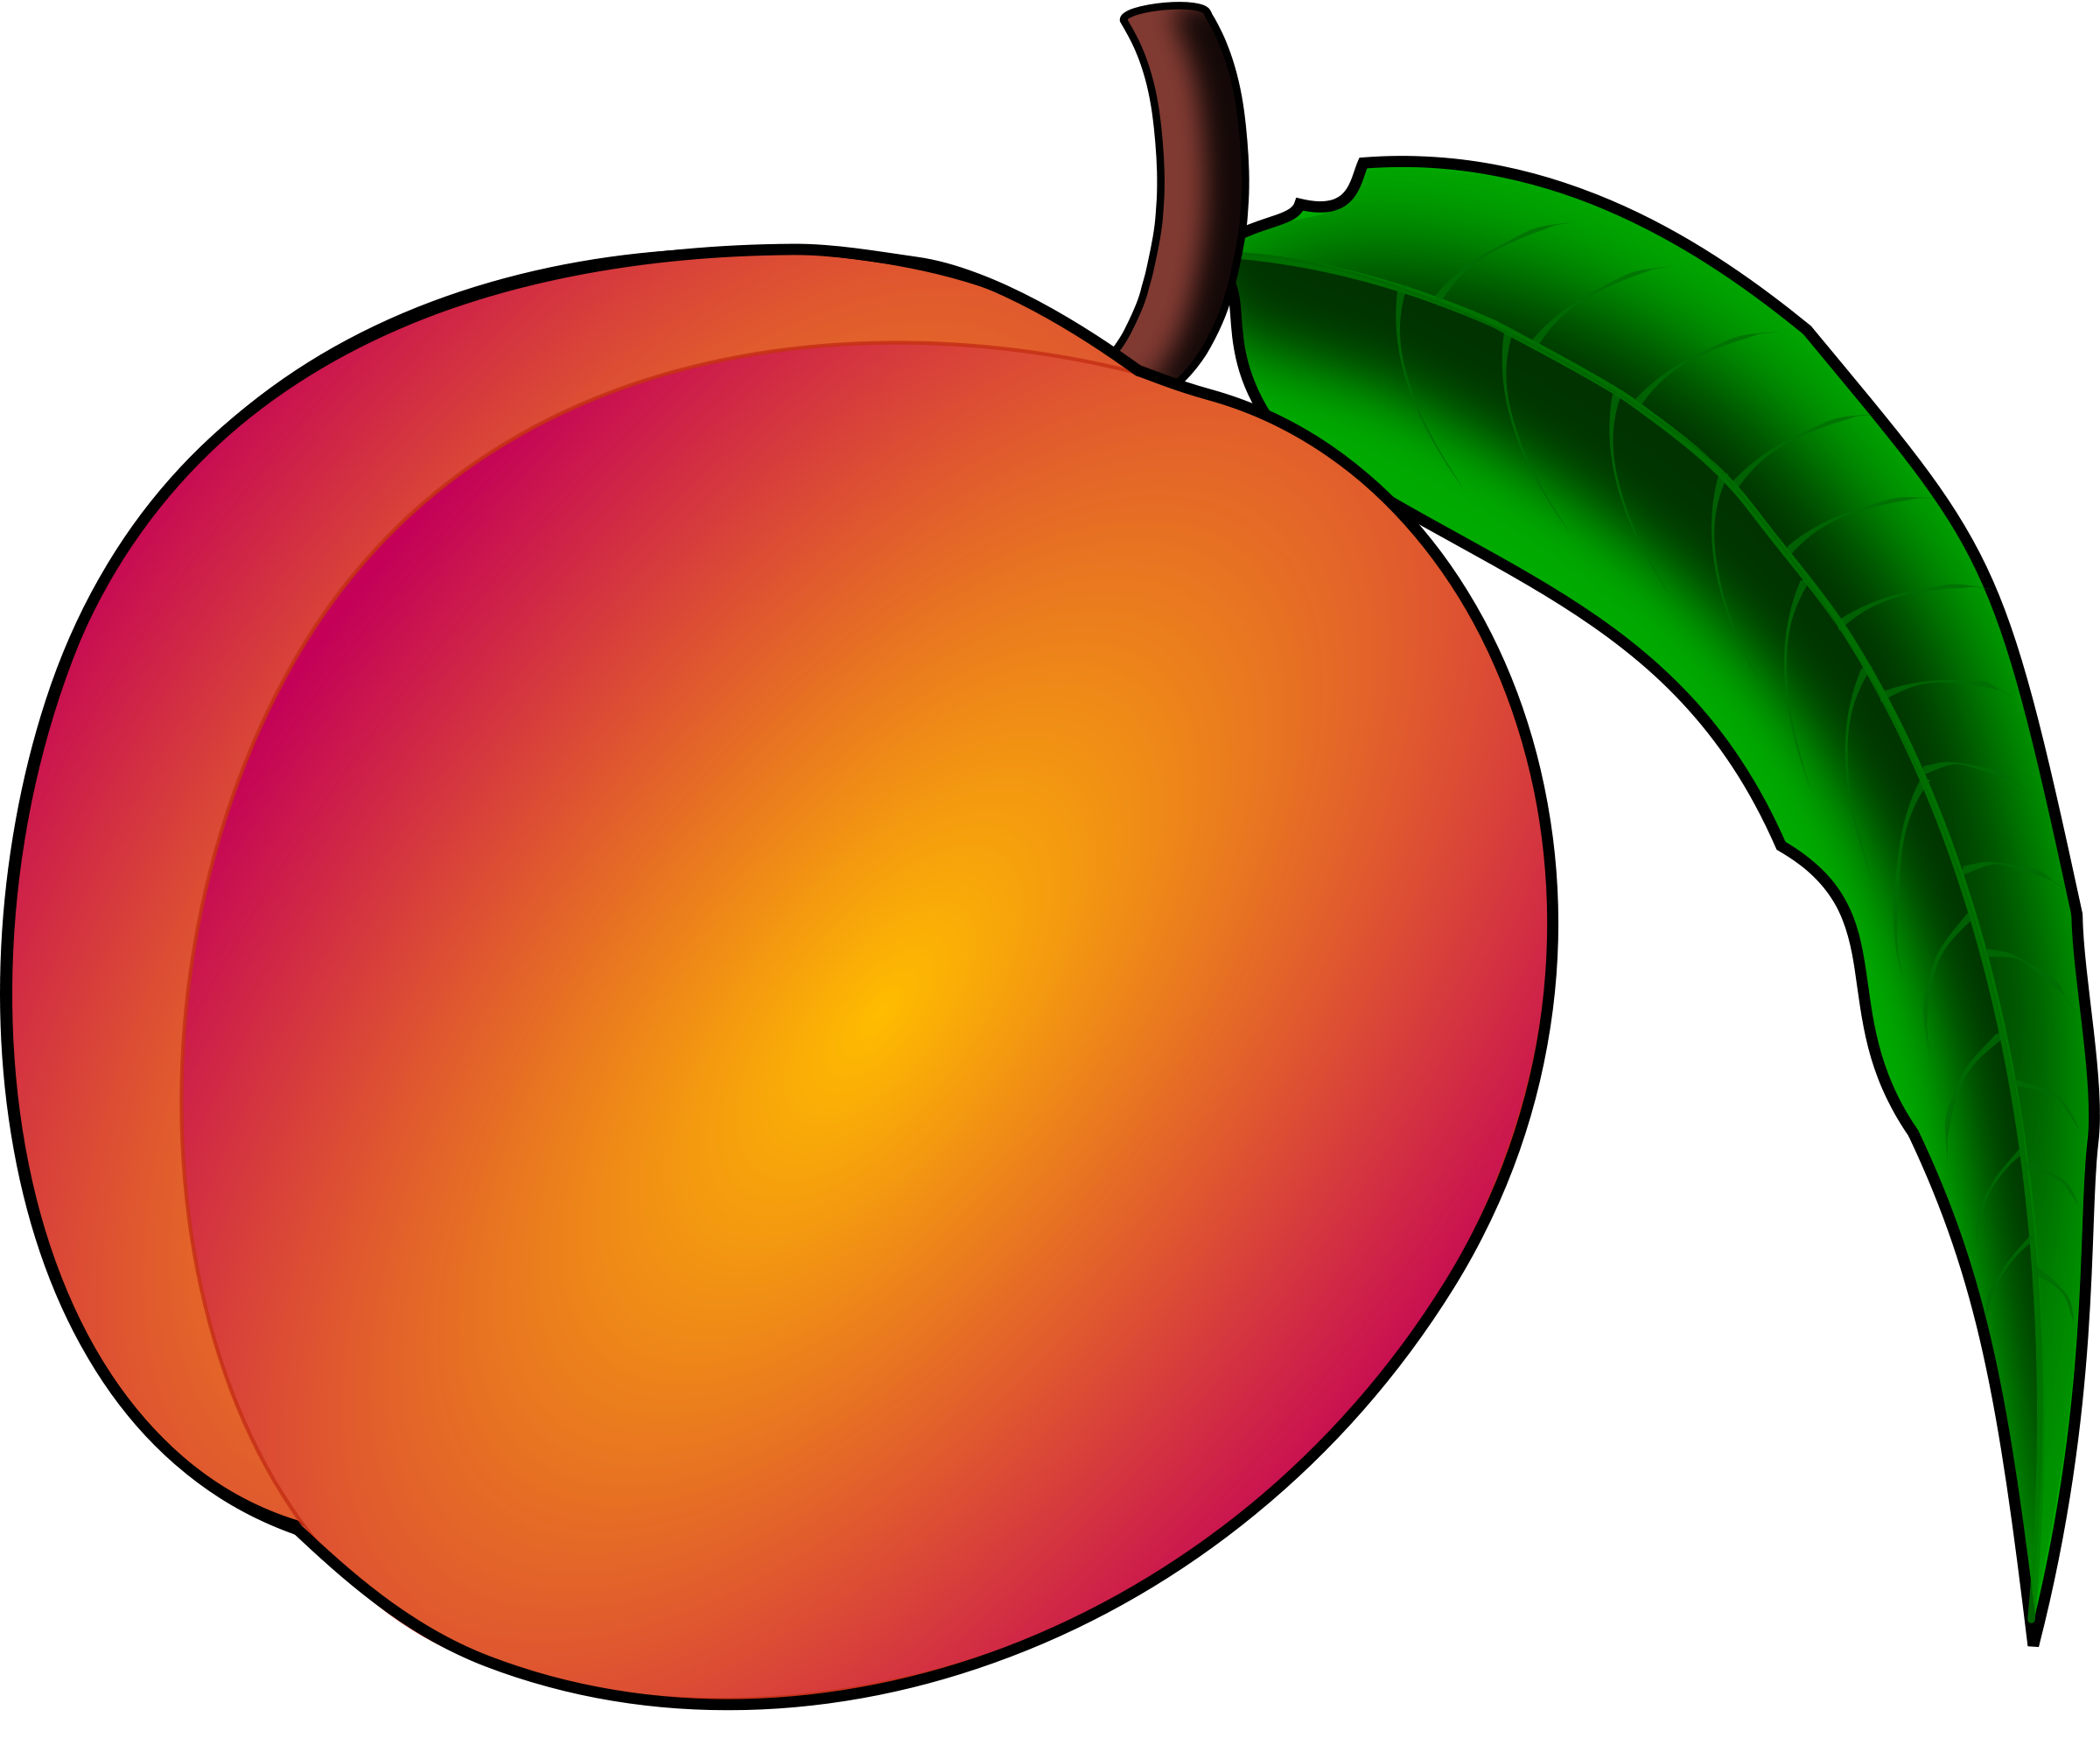 Peach clipart #8, Download drawings